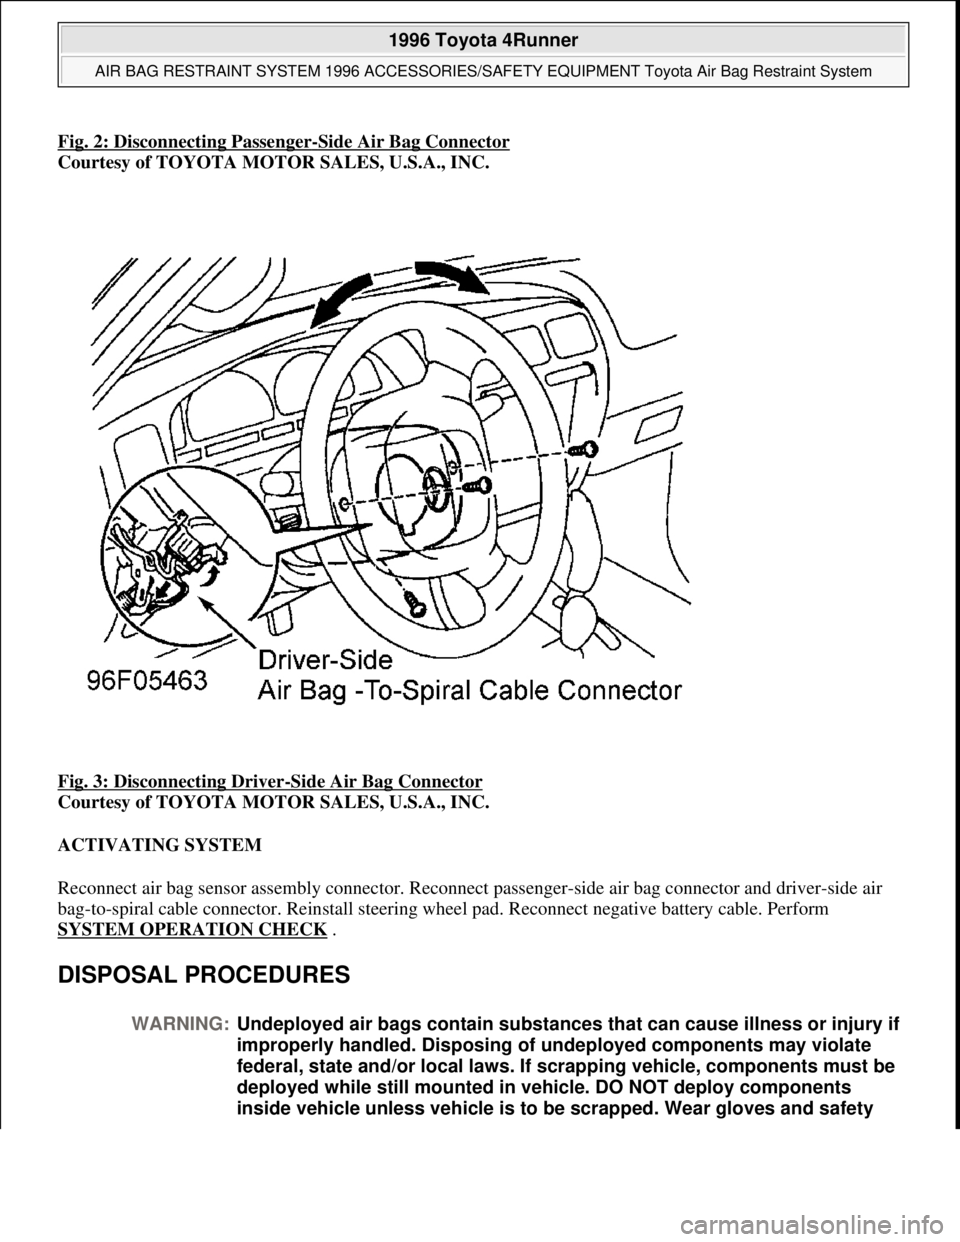 TOYOTA RAV4 1996  Service Repair Manual Fig. 2: Disconnecting Passenger-Side Air Bag Connector
Courtesy of TOYOTA MOTOR SALES, U.S.A., INC. 
Fig. 3: Disconnecting Driver
-Side Air Bag Connector 
Courtesy of TOYOTA MOTOR SALES, U.S.A., INC. 